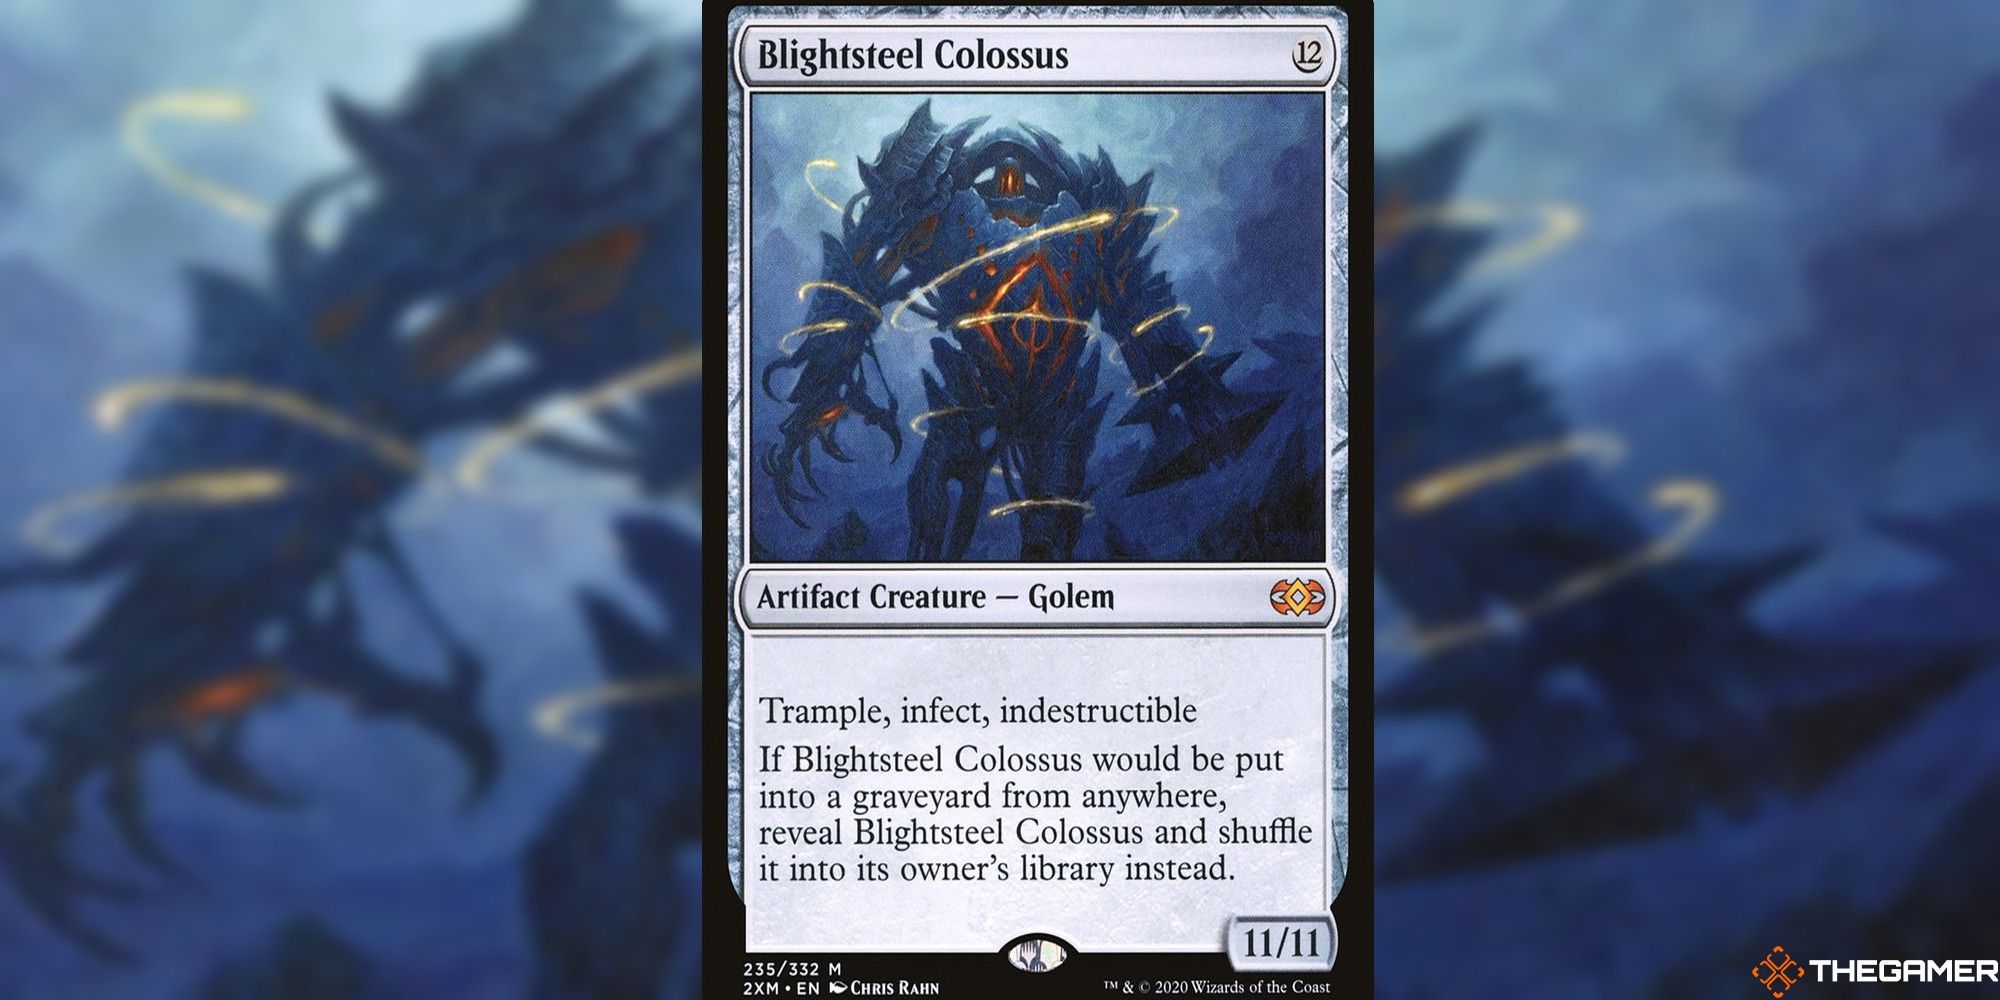 blightsteel colossus full card and art background